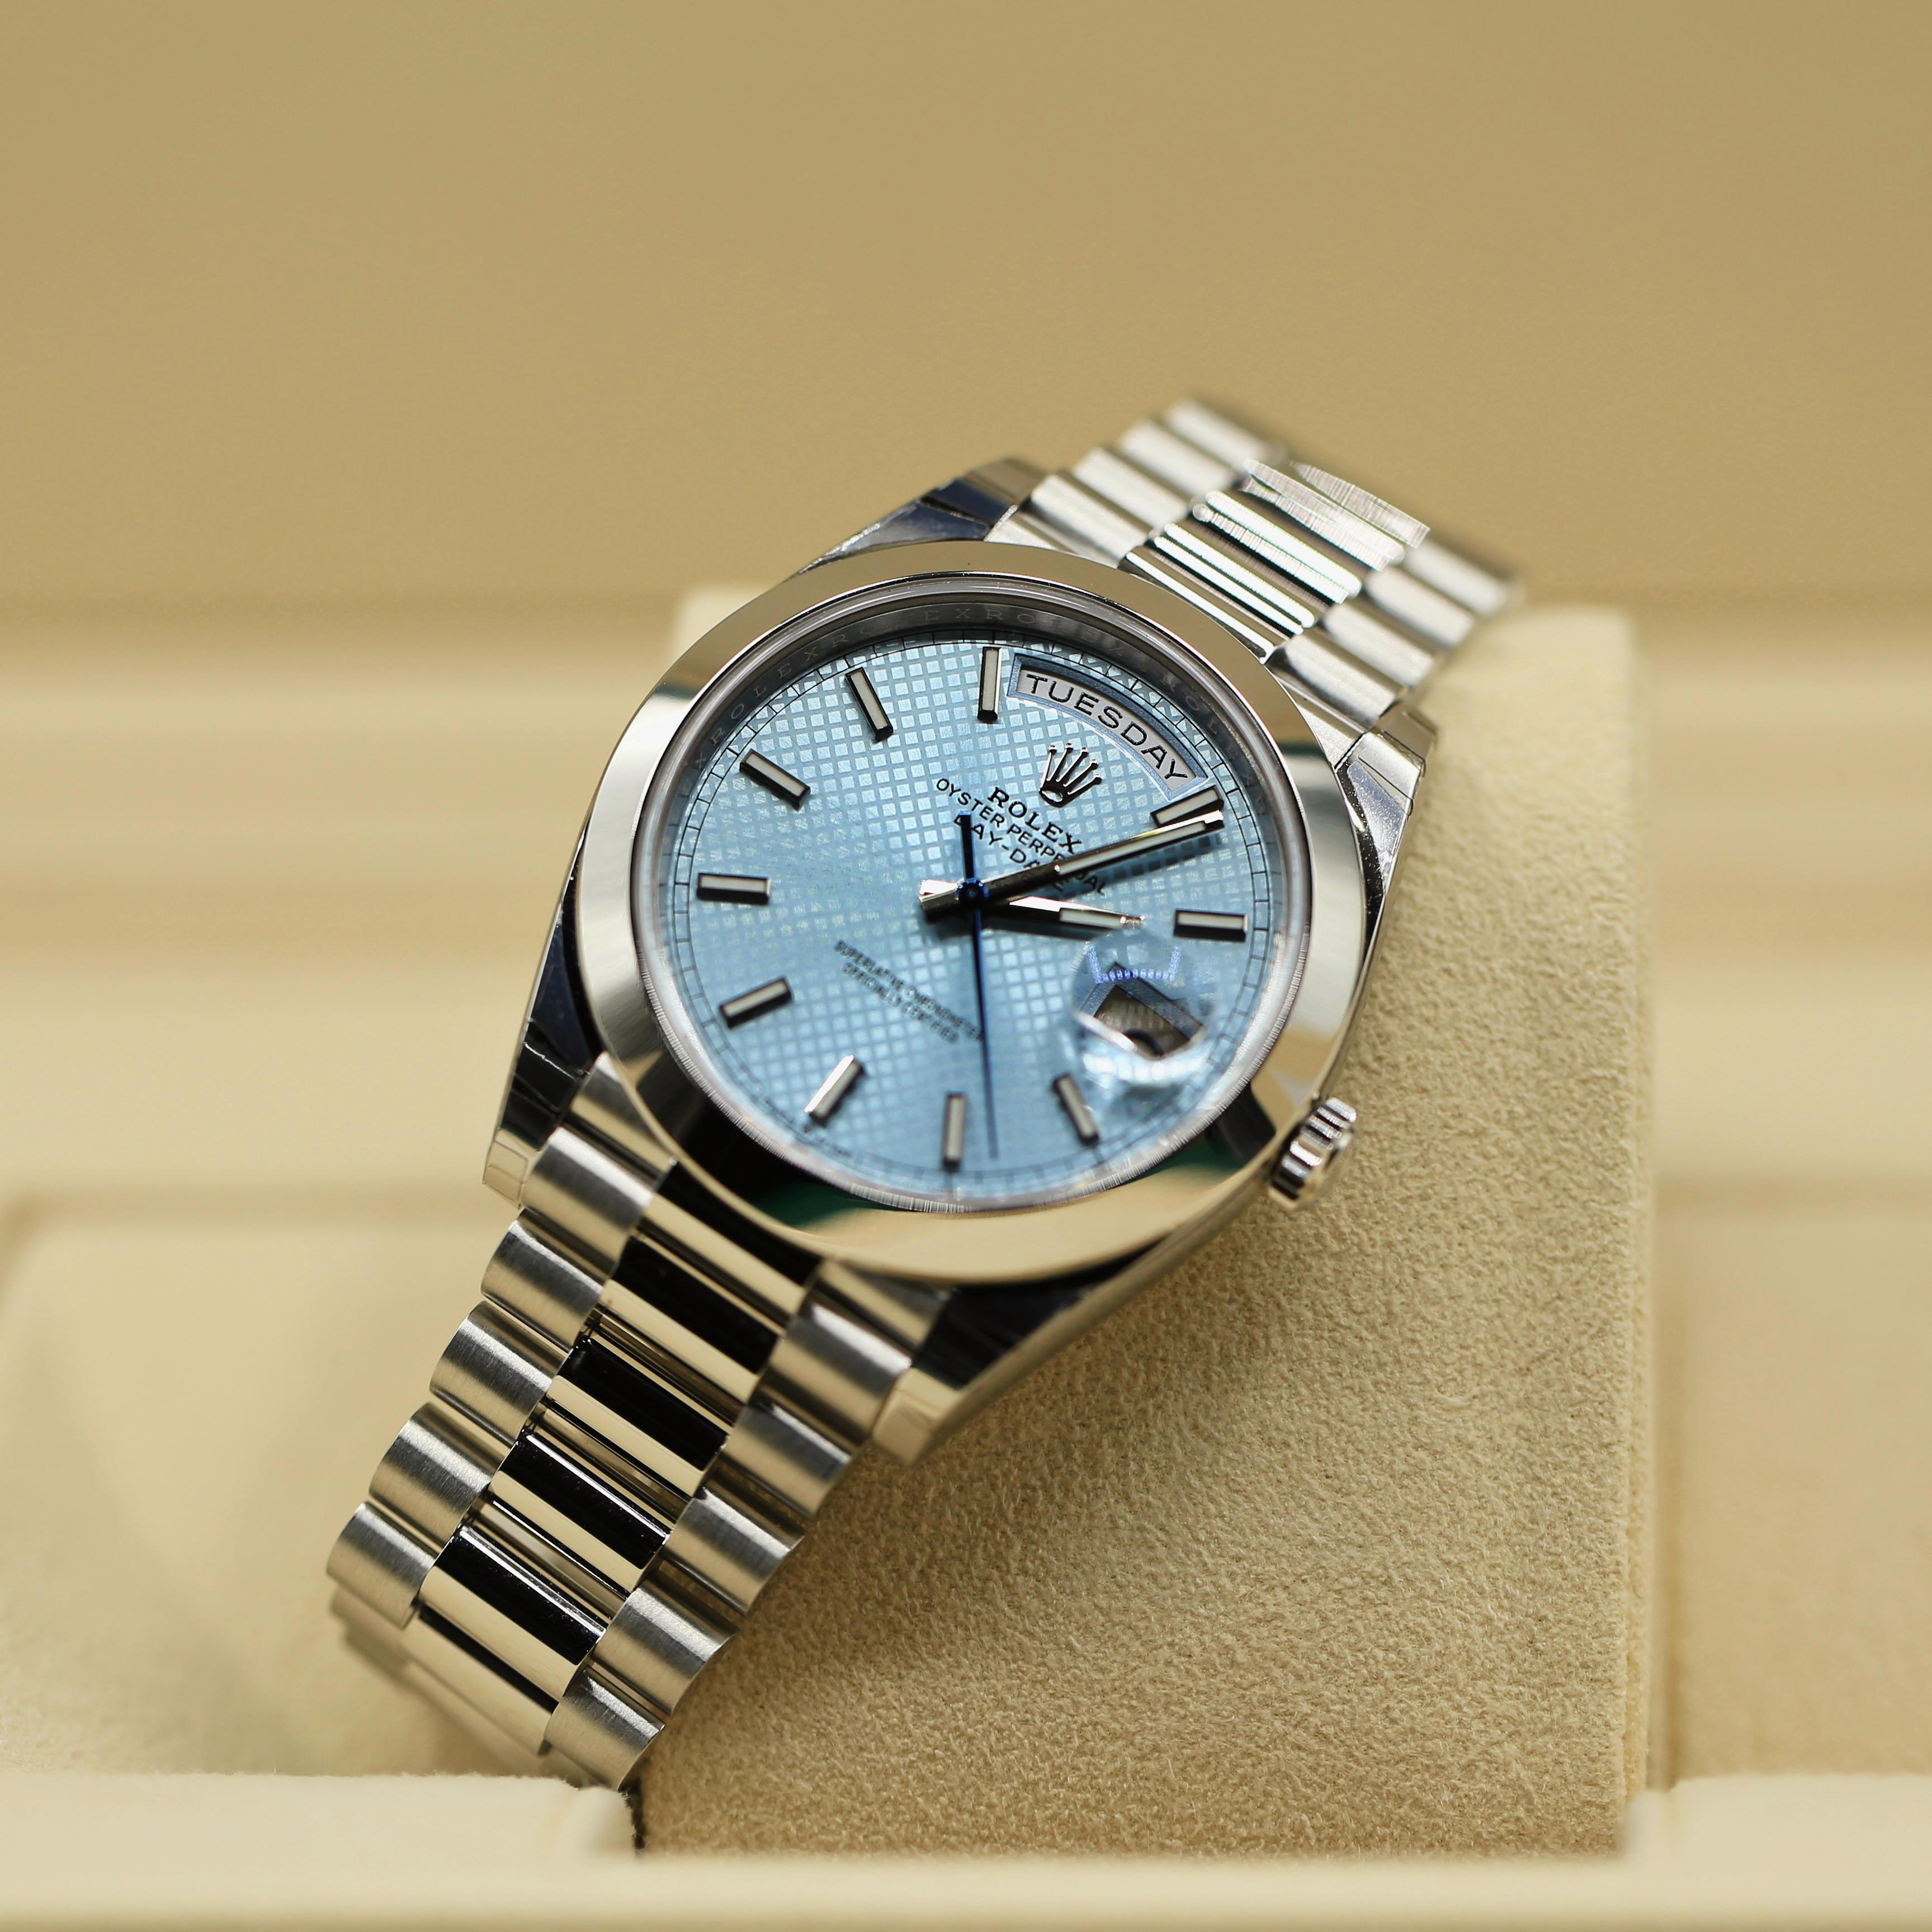 Rolex Day-Date 40 Blue dial, Smooth Bezel, President bracelet, Watch 228206-0004

40mm 950 platinum case, screw-down back with Rolex fluting, screw-down crown with twin lock double waterproofness system, smooth bezel, scratch-resistant double